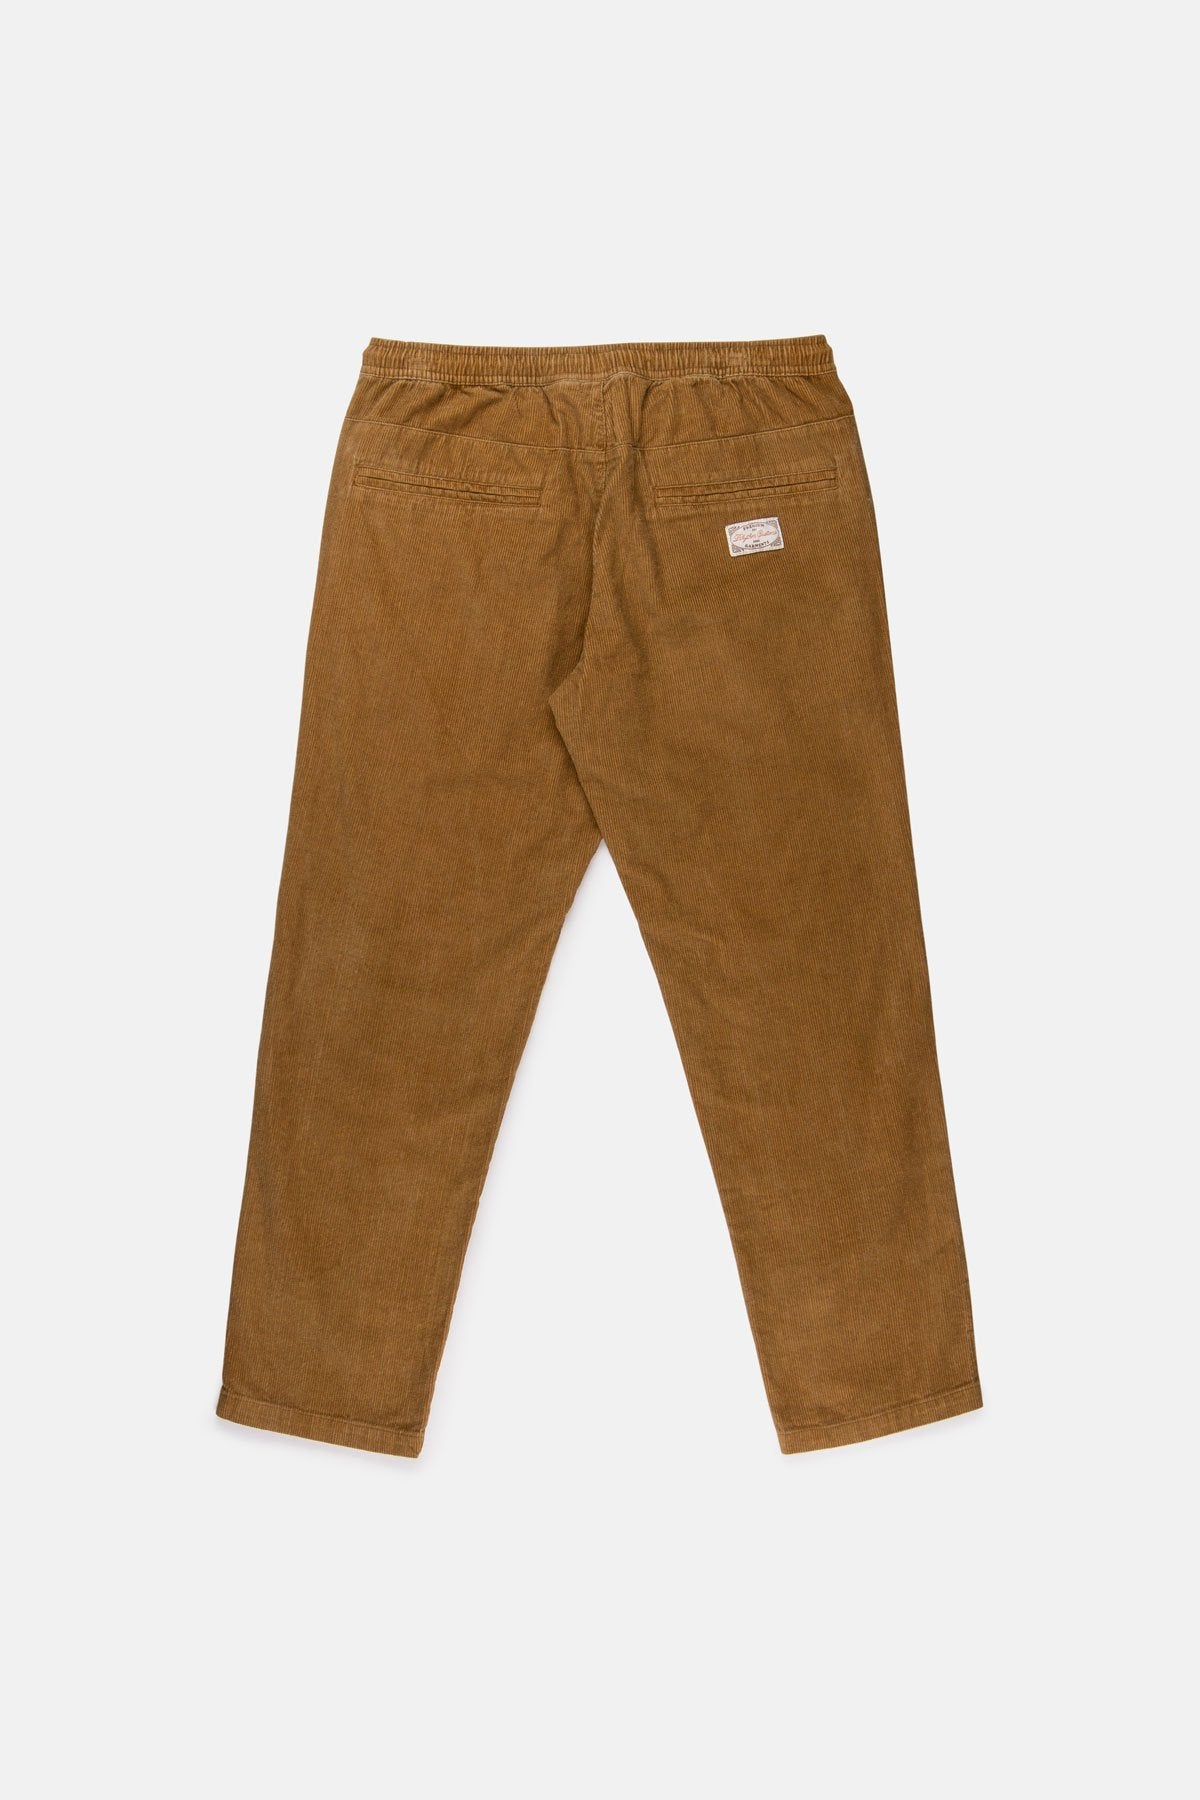 The Cord Sunday Pant